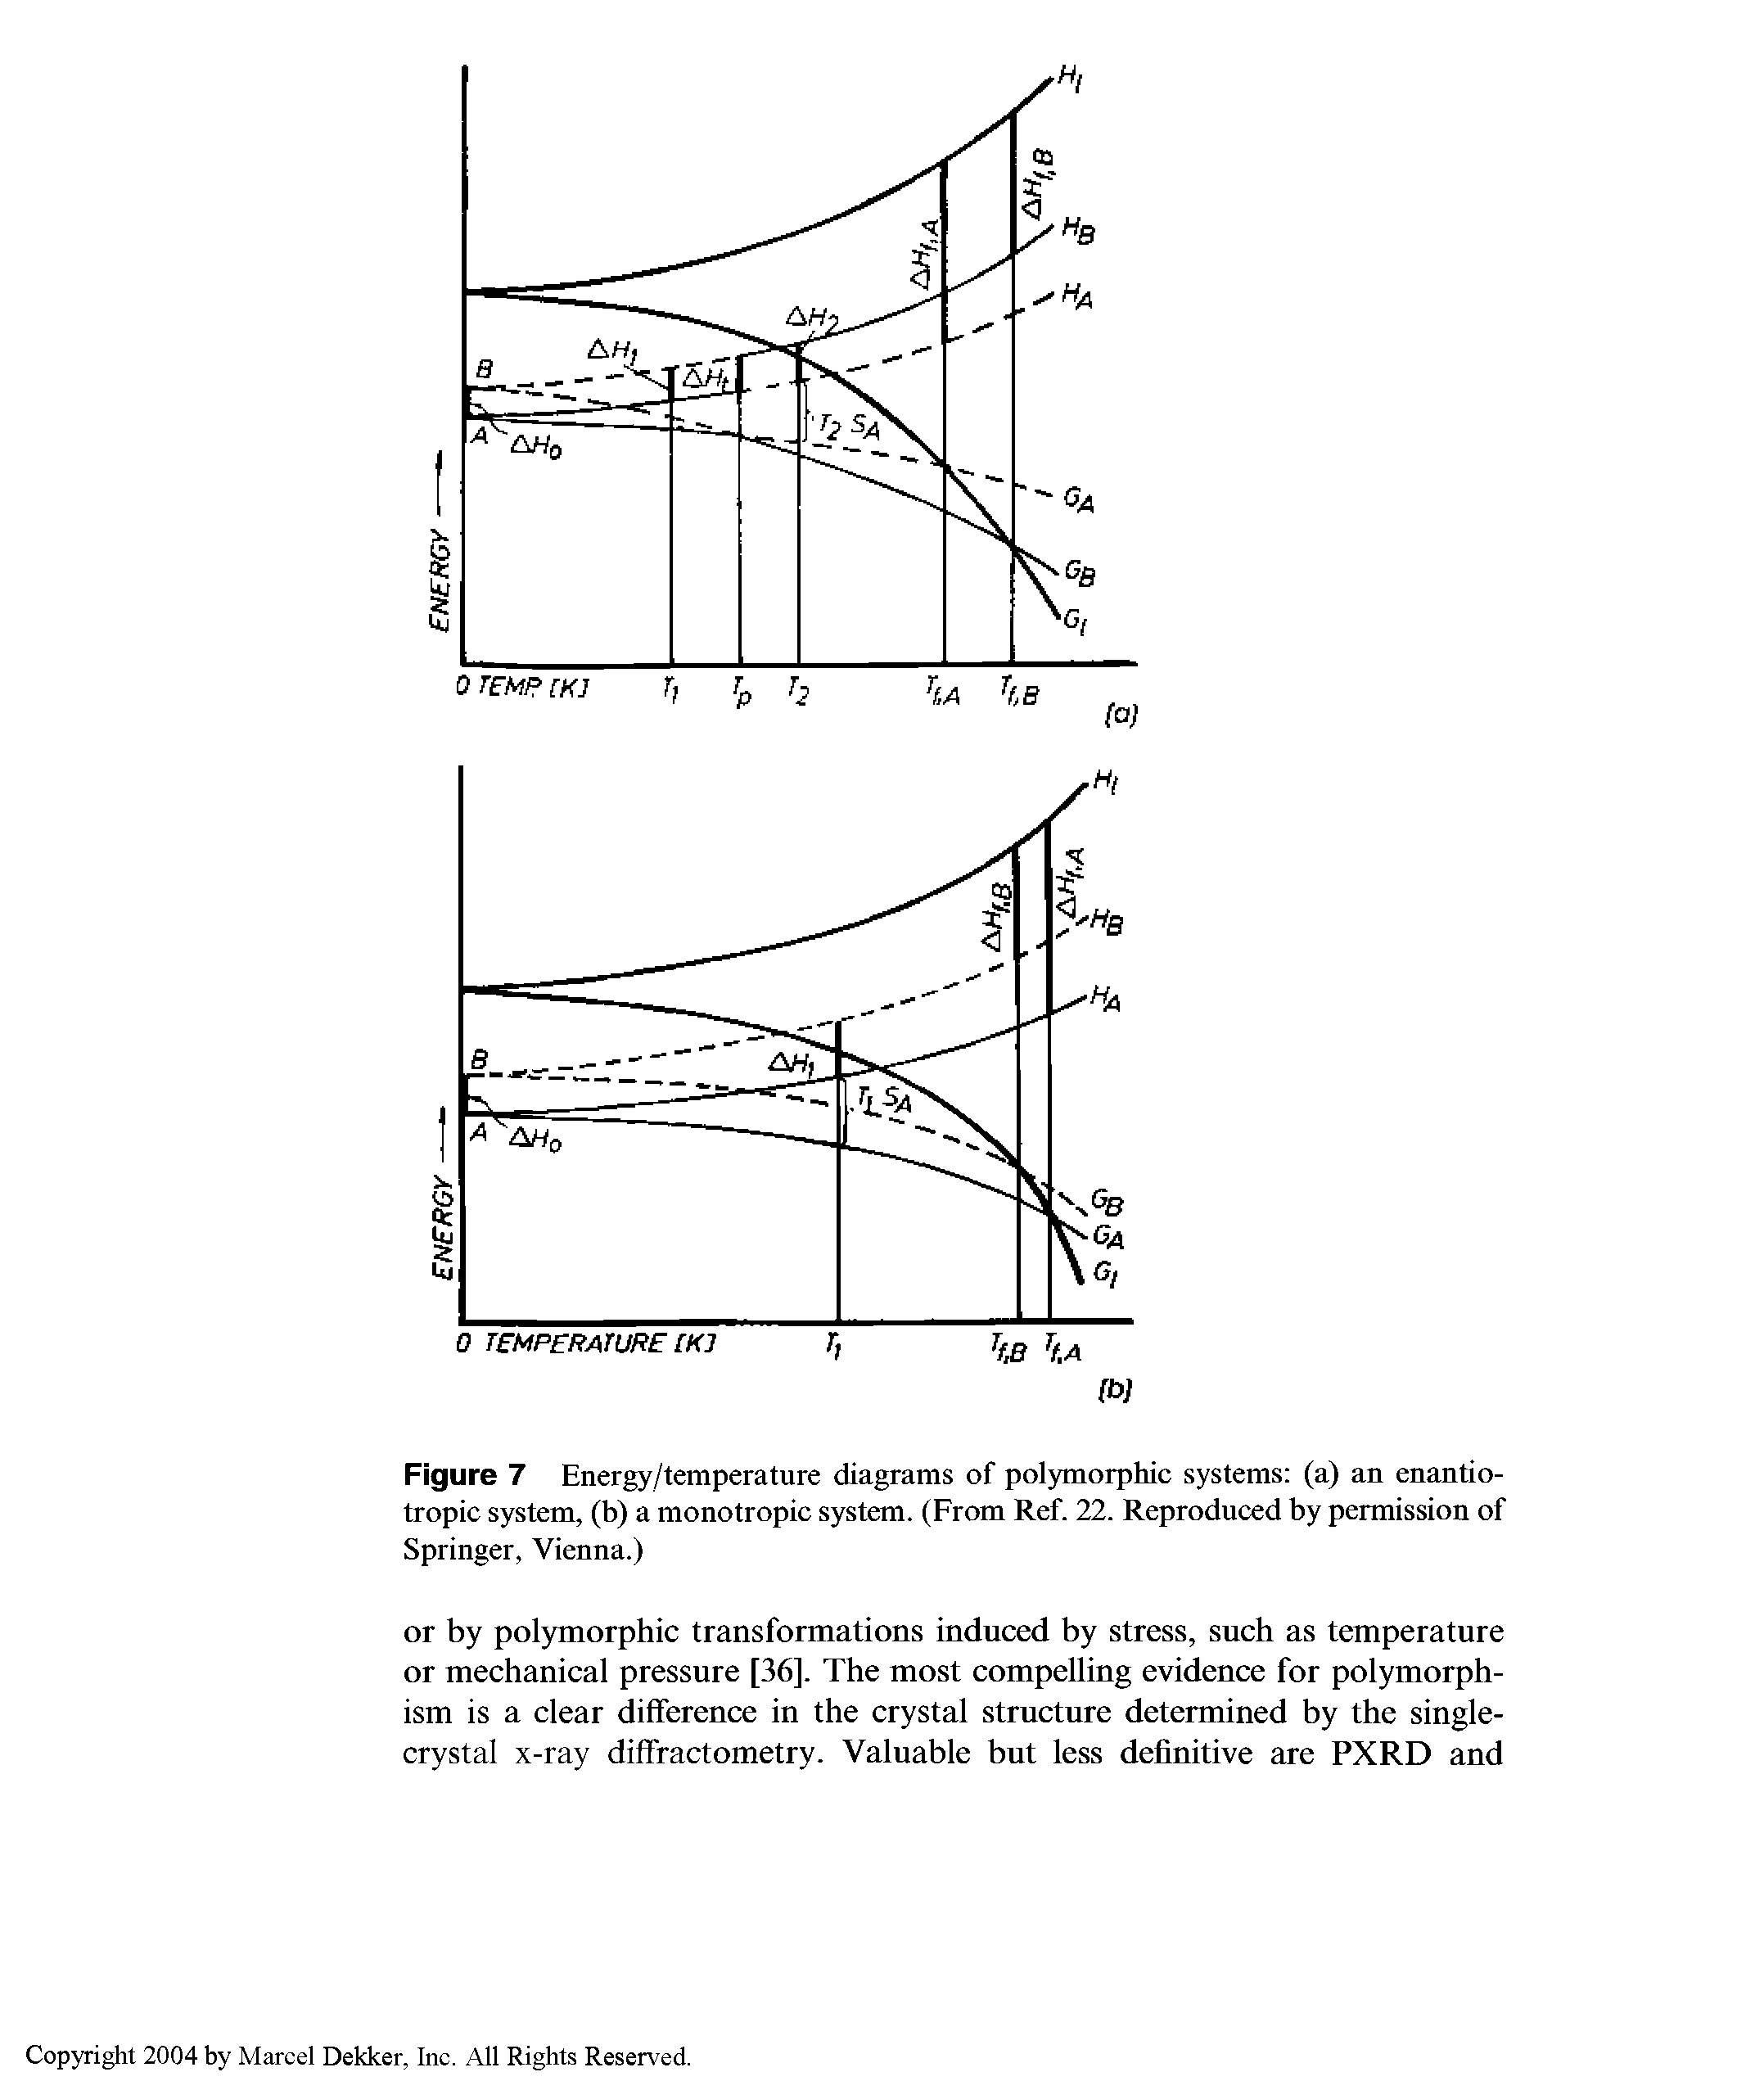 Figure 7 Energy/temperature diagrams of polymorphic systems (a) an enantio-tropic system, (b) a monotropic system. (From Ref. 22. Reproduced by permission of Springer, Vienna.)...